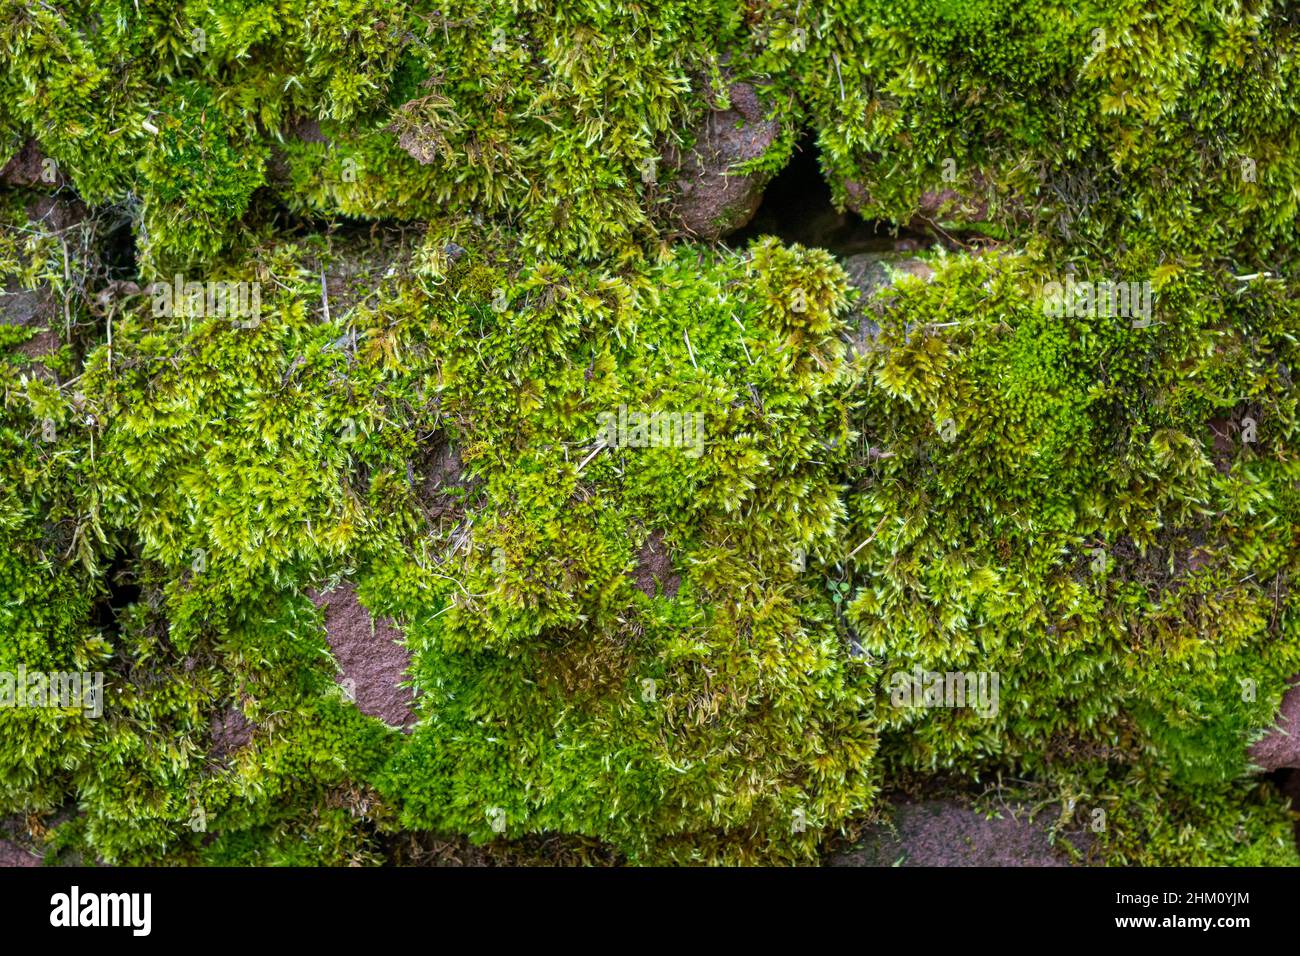 fresh green moss building a smooth carpet on old sandstone wall. Impact of wet, humid condition due to shady location. Stock Photo